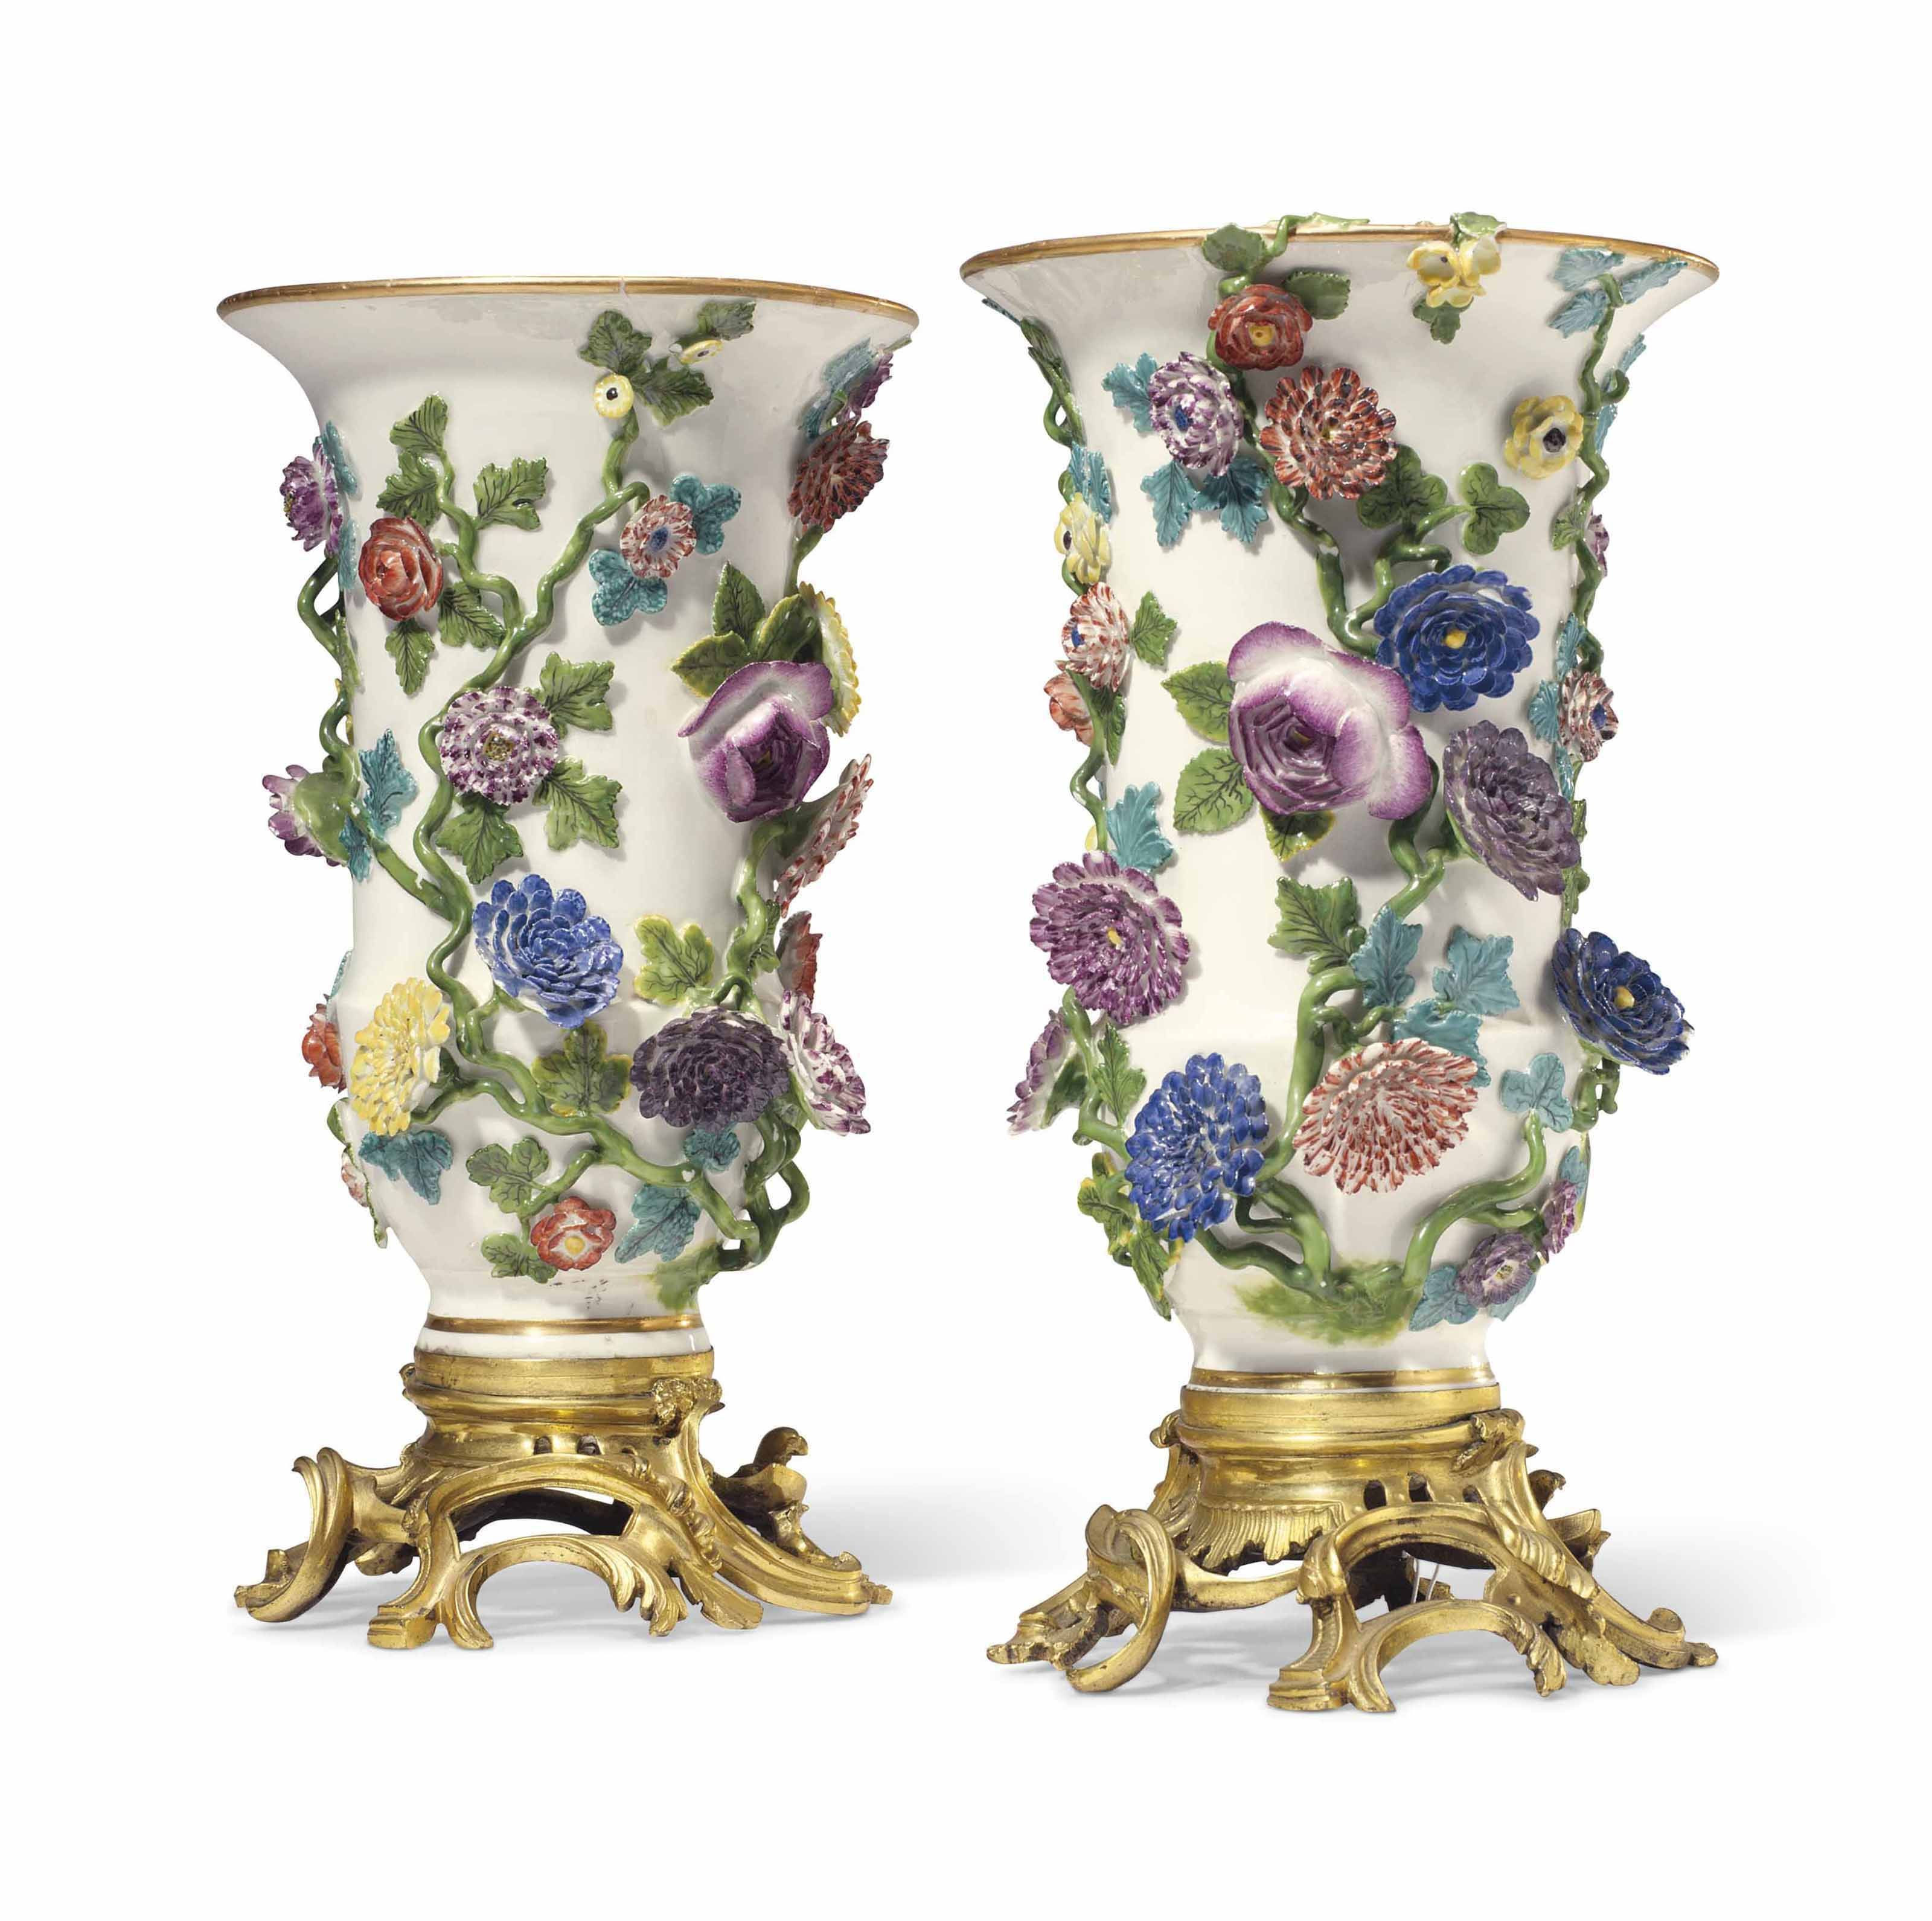 12 attractive Wrought Iron Vase Holder 2024 free download wrought iron vase holder of 23 crystal beaded vase the weekly world for a pair of ormolu mounted meissen porcelain flower encrusted vases